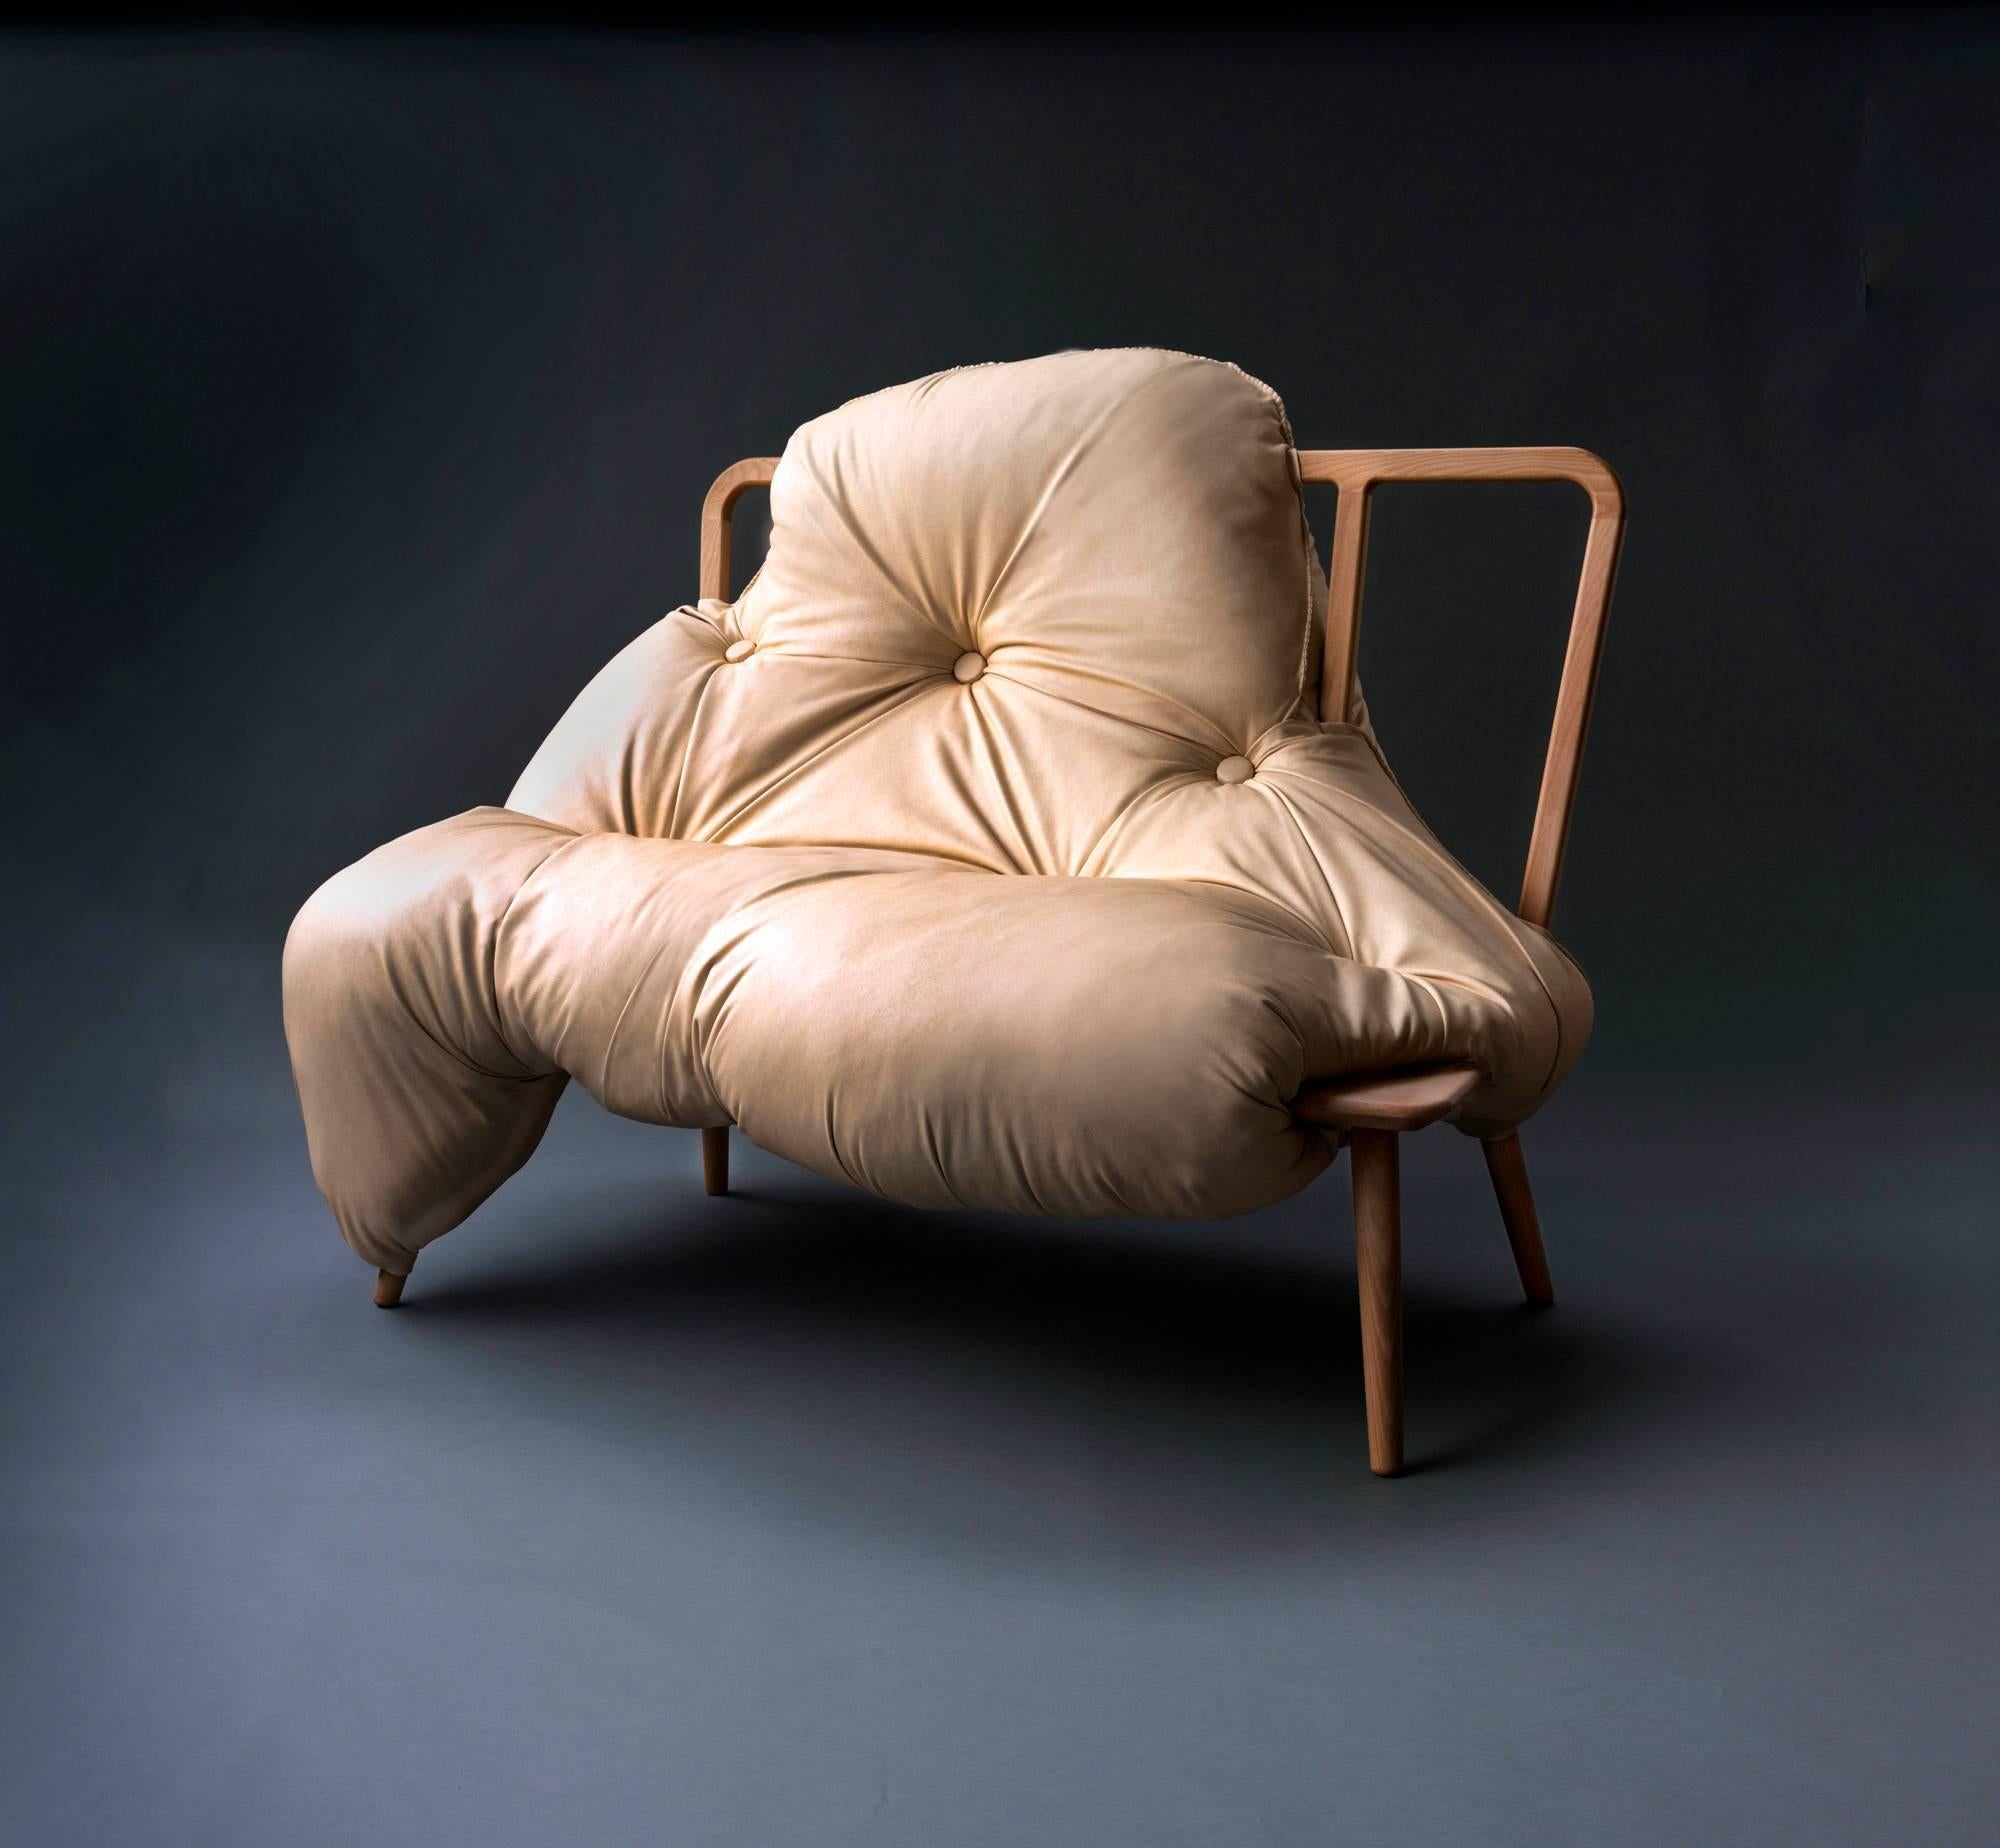 My Big Fat sofa narrates the bond between a female figure and her sofa. Together they sit as one, the upholstery spills and bulges, enveloping the wooden frame as a marriage of two mediums. The biomorphic seat is unsettling and inviting both at